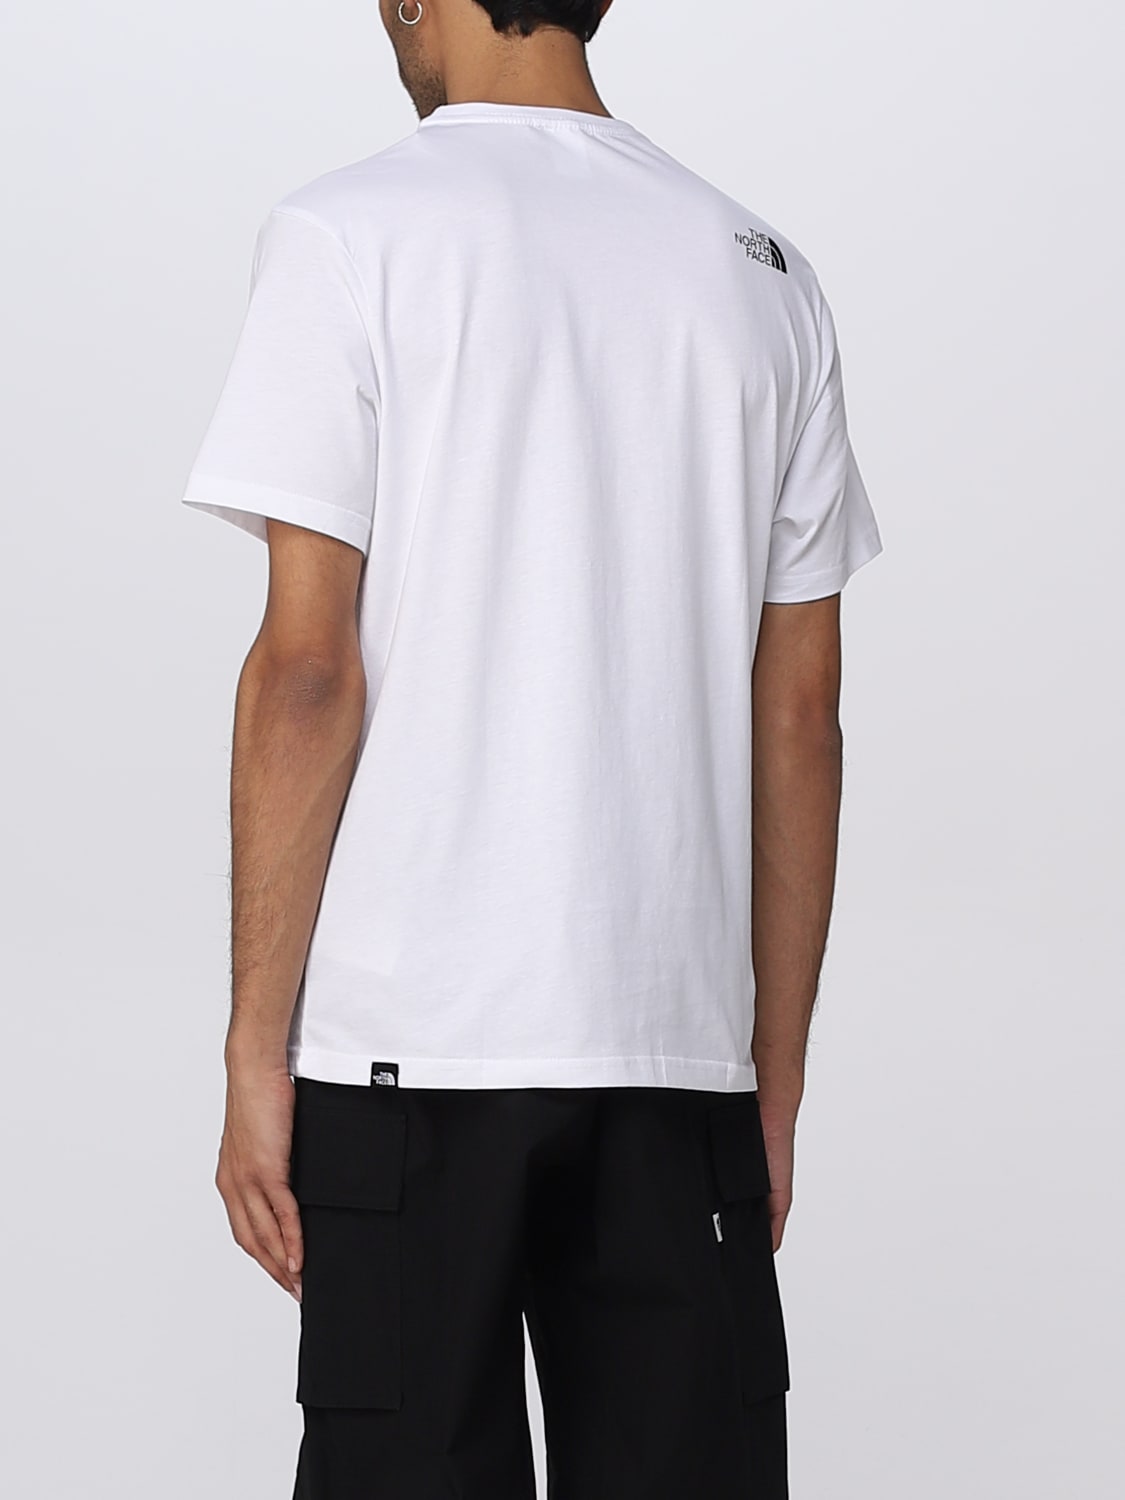 THE NORTH FACE: t-shirt for man White at t-shirt NF0A4SZU online | North - The Face